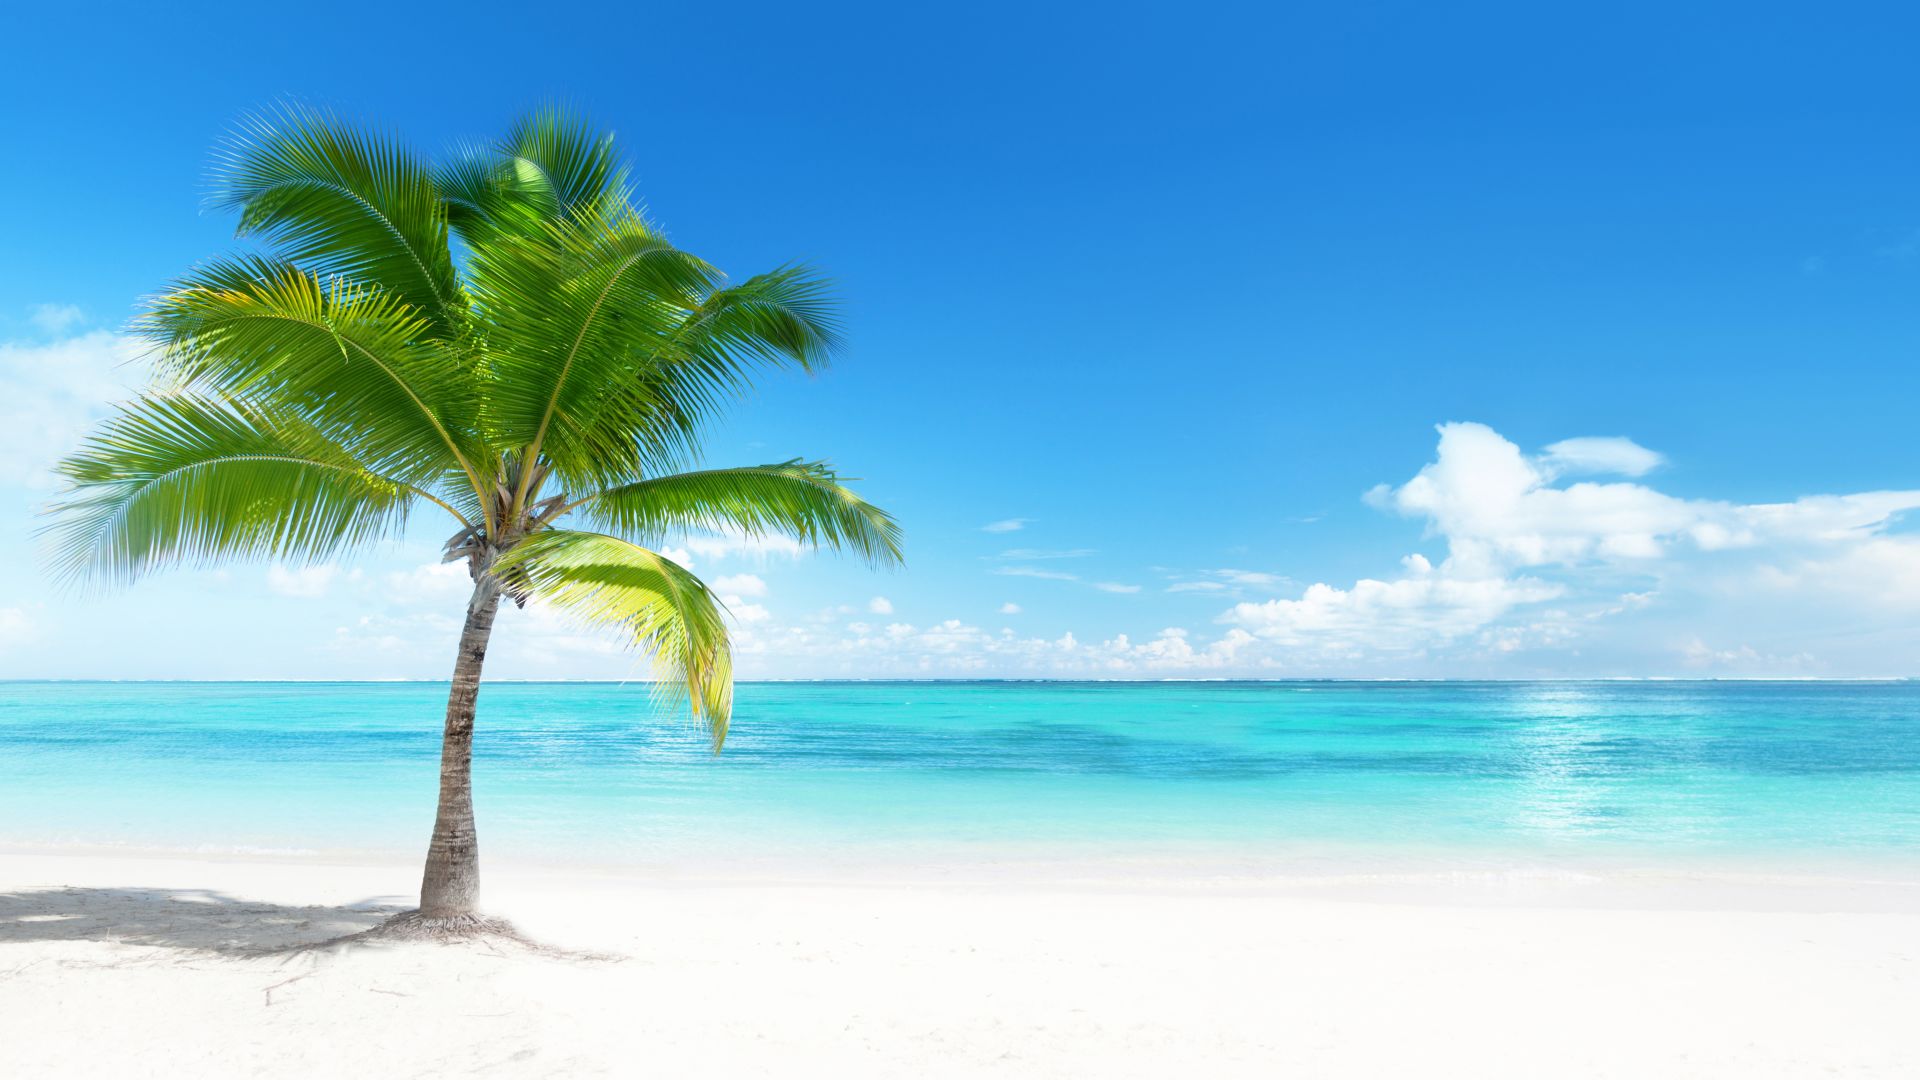 A Beach With Palm Trees In Front Of A Body Of Water